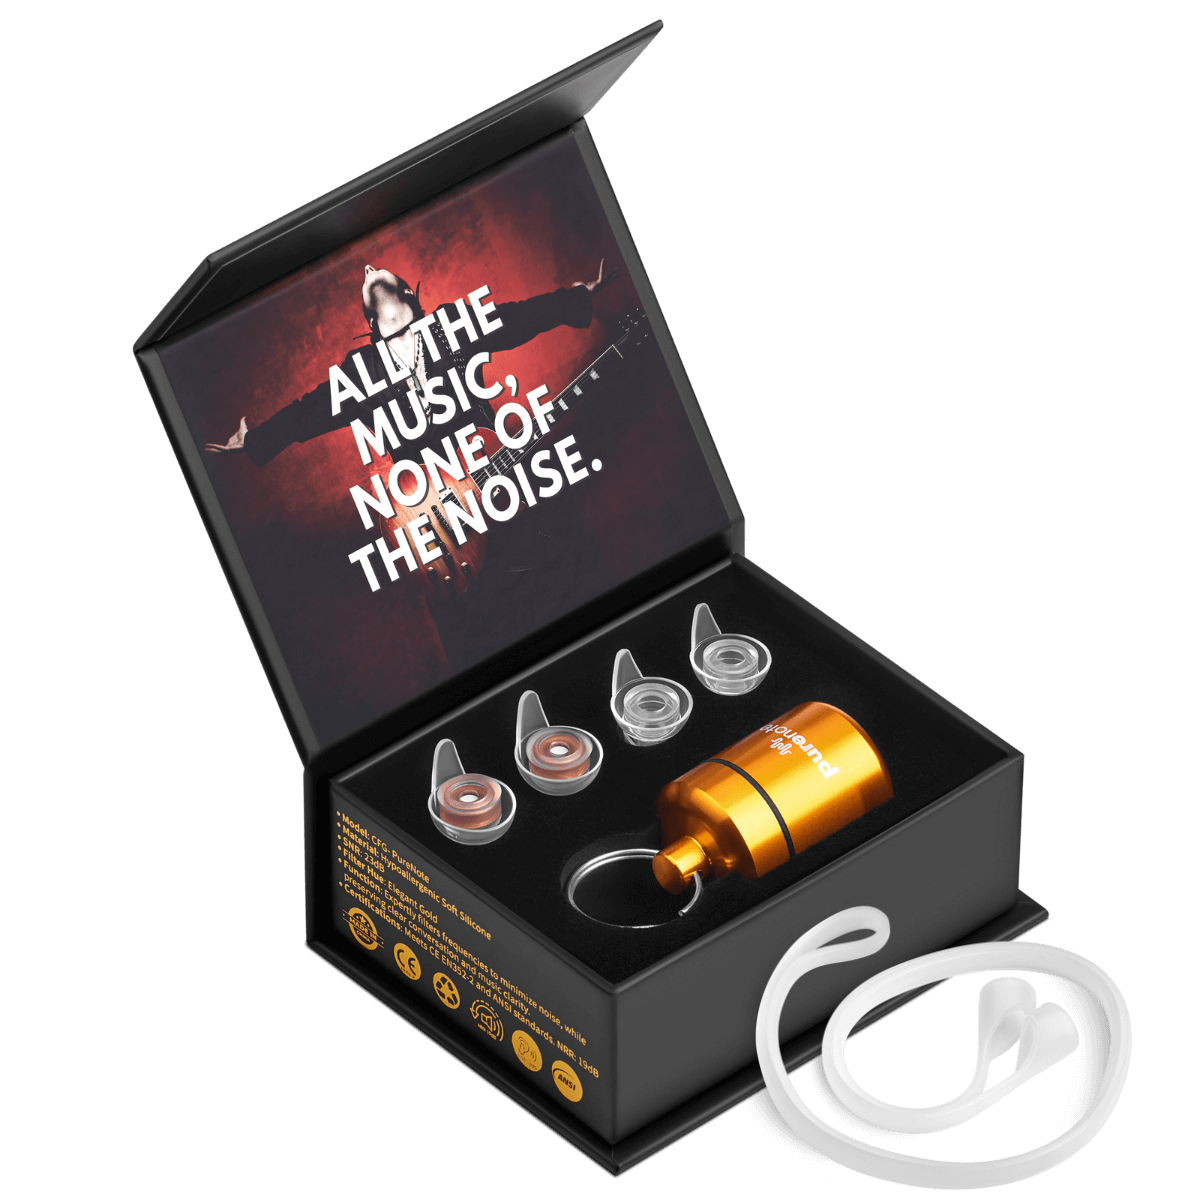 An open PureNote packaging box revealing earplugs and accessories, with the slogan 'All the music, none of the noise' printed inside the lid, highlighting the product's ability to filter out unwanted noise while preserving audio quality, perfect for CFG Cable Free Guitar enthusiasts seeking pure sound.